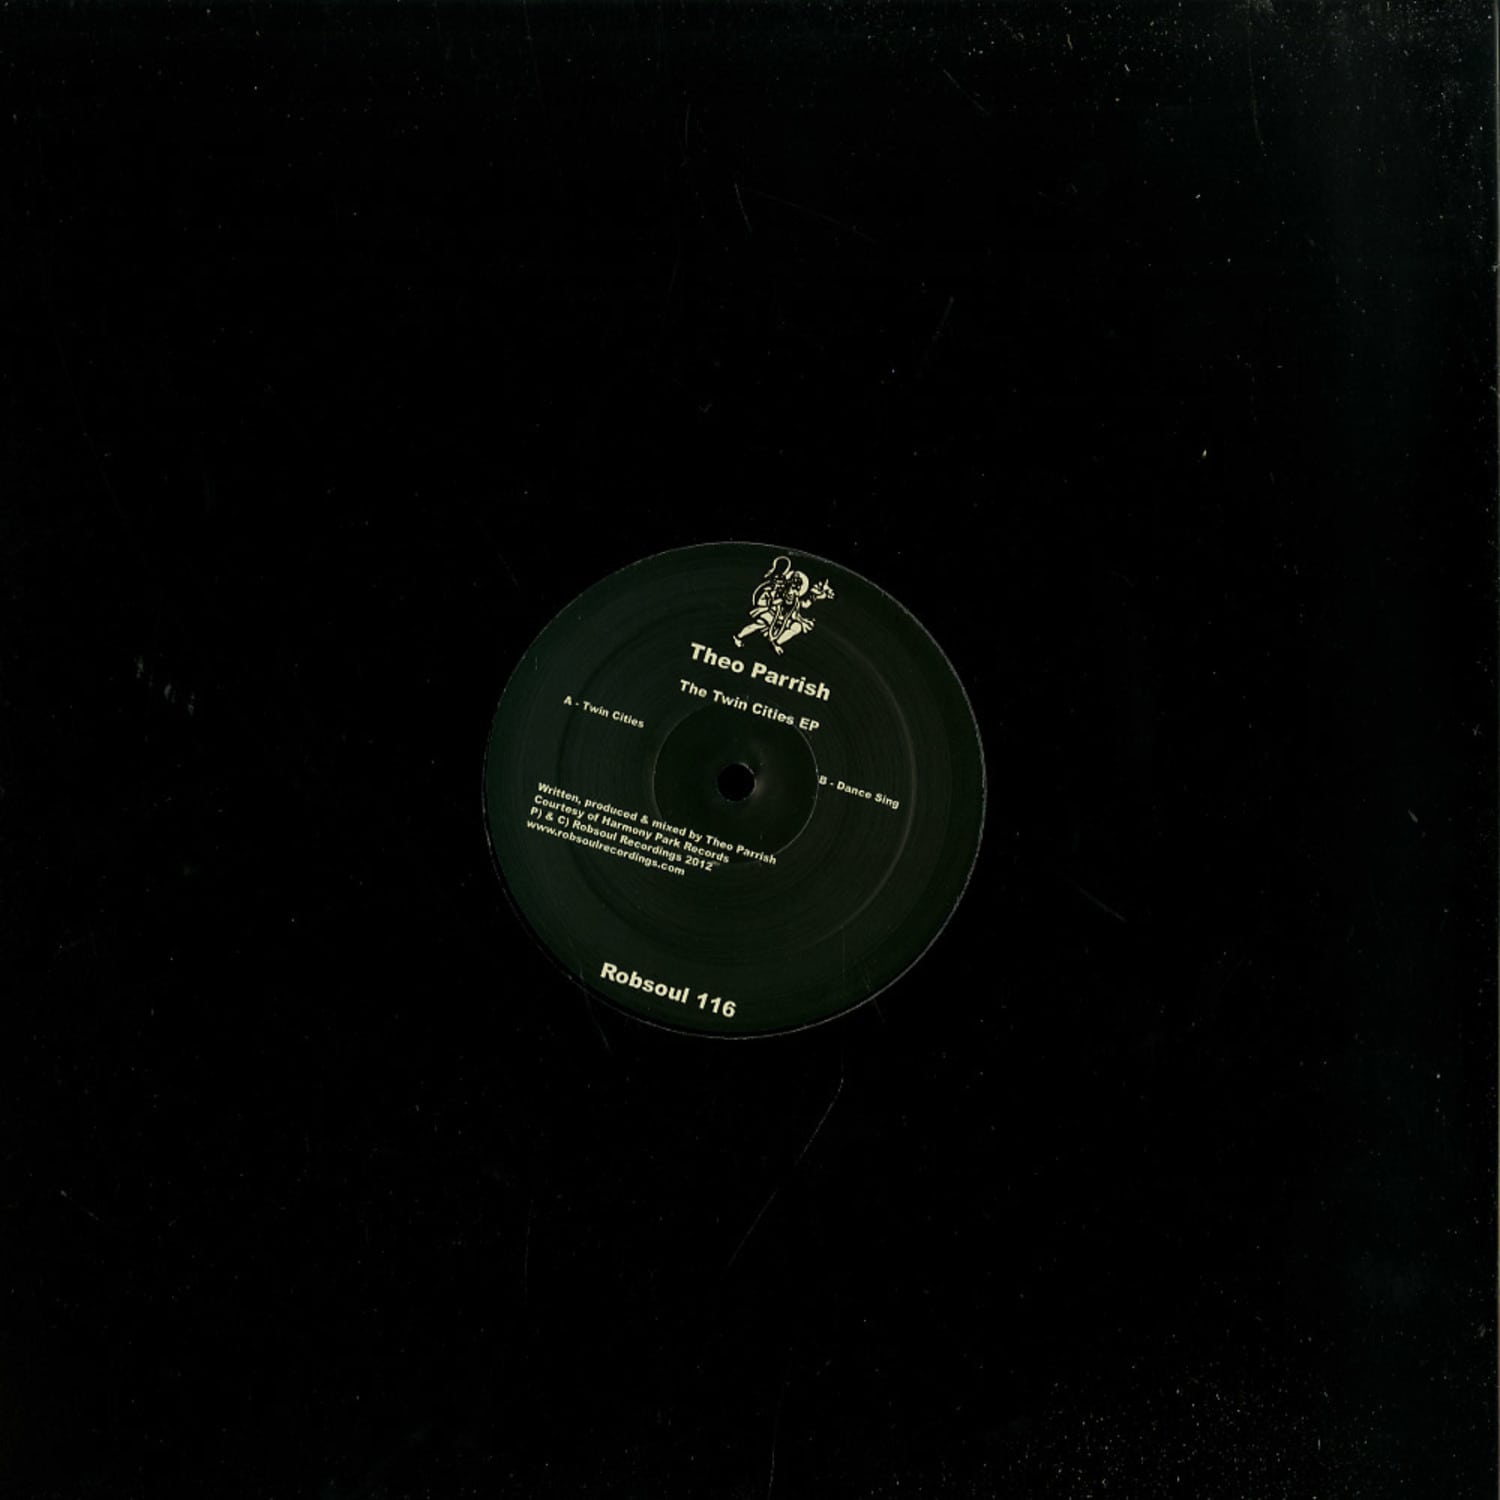 Theo Parrish - THE TWIN CITIES EP 